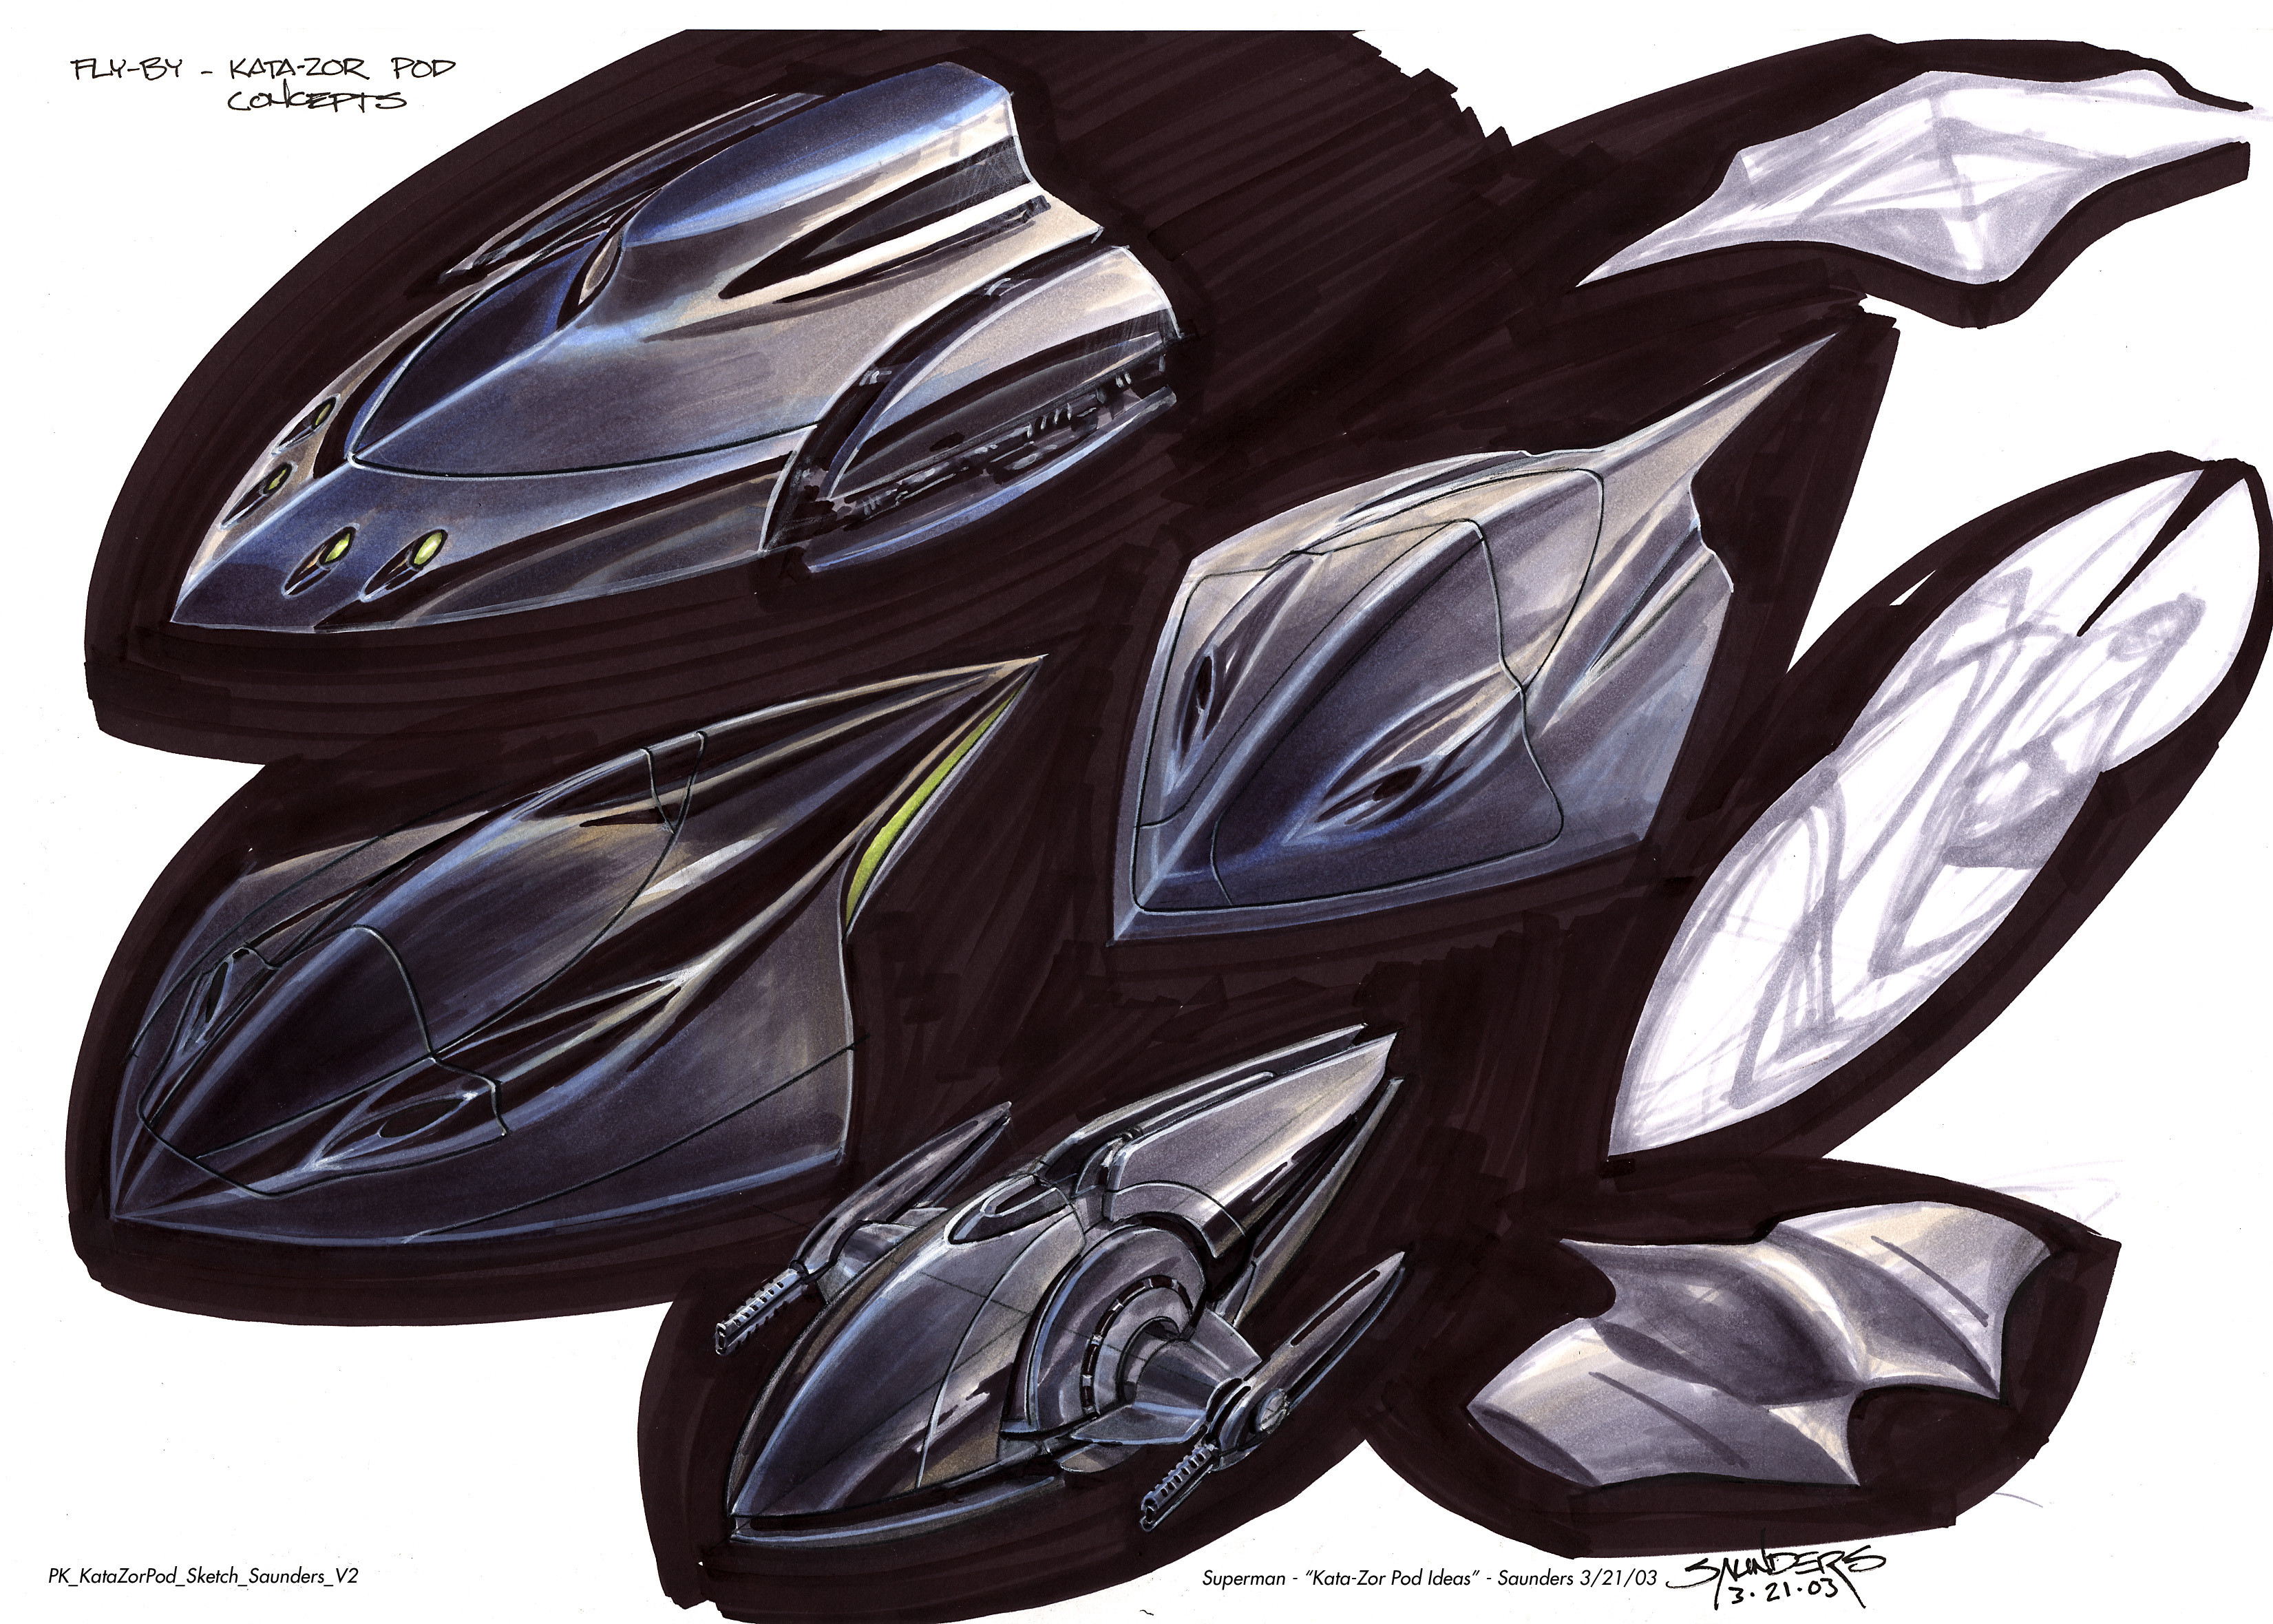 More initial concepts. These were still considered too similar to Superman's pod, so a new aesthetic direction was needed. 